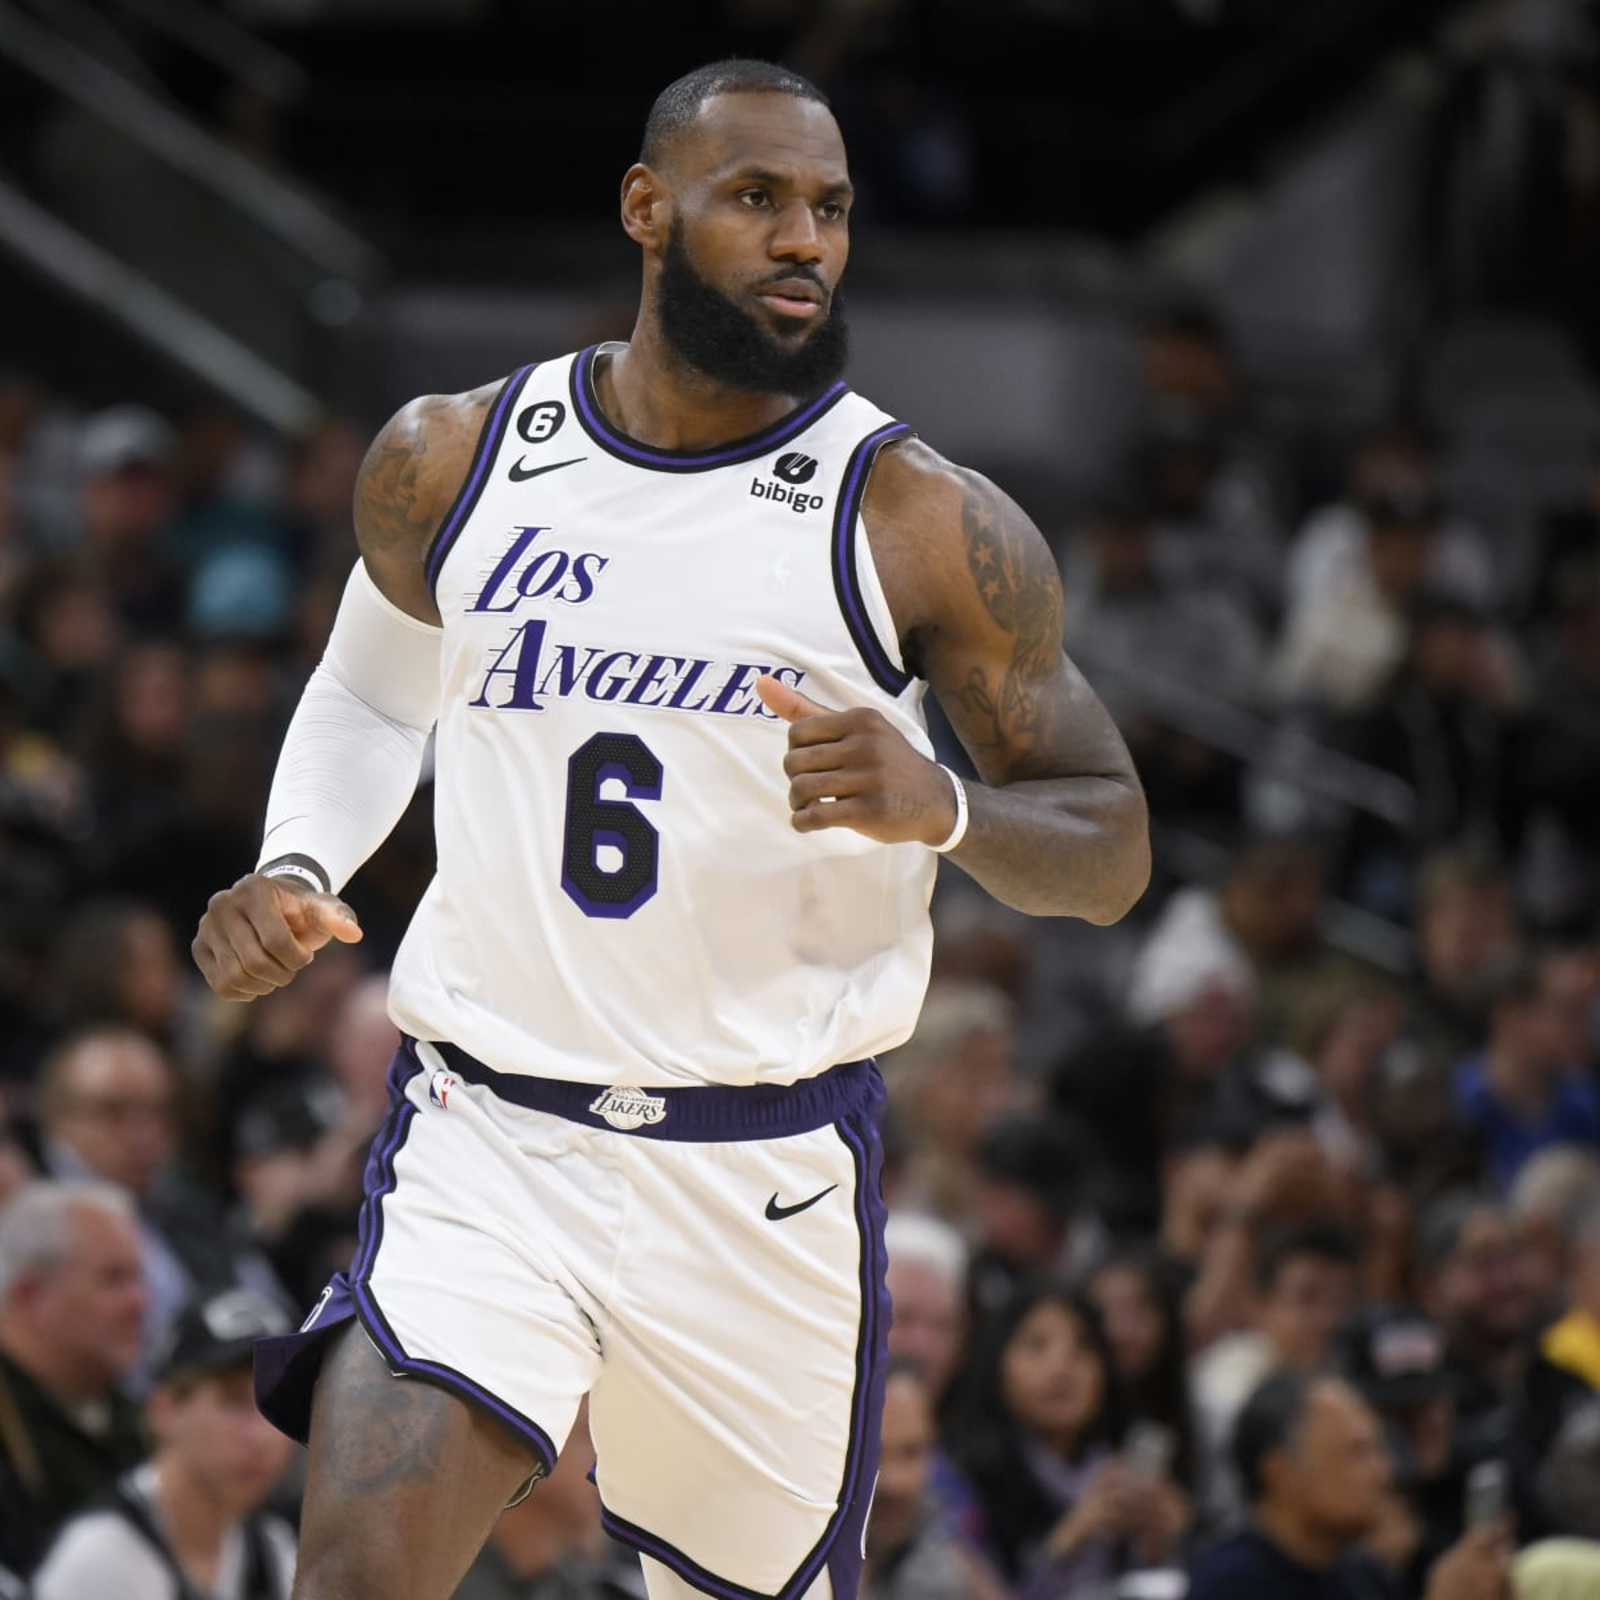 Lakers' LeBron James: 'If You Know Me I Ain't Paying the 5' for Twitter  Verification, News, Scores, Highlights, Stats, and Rumors